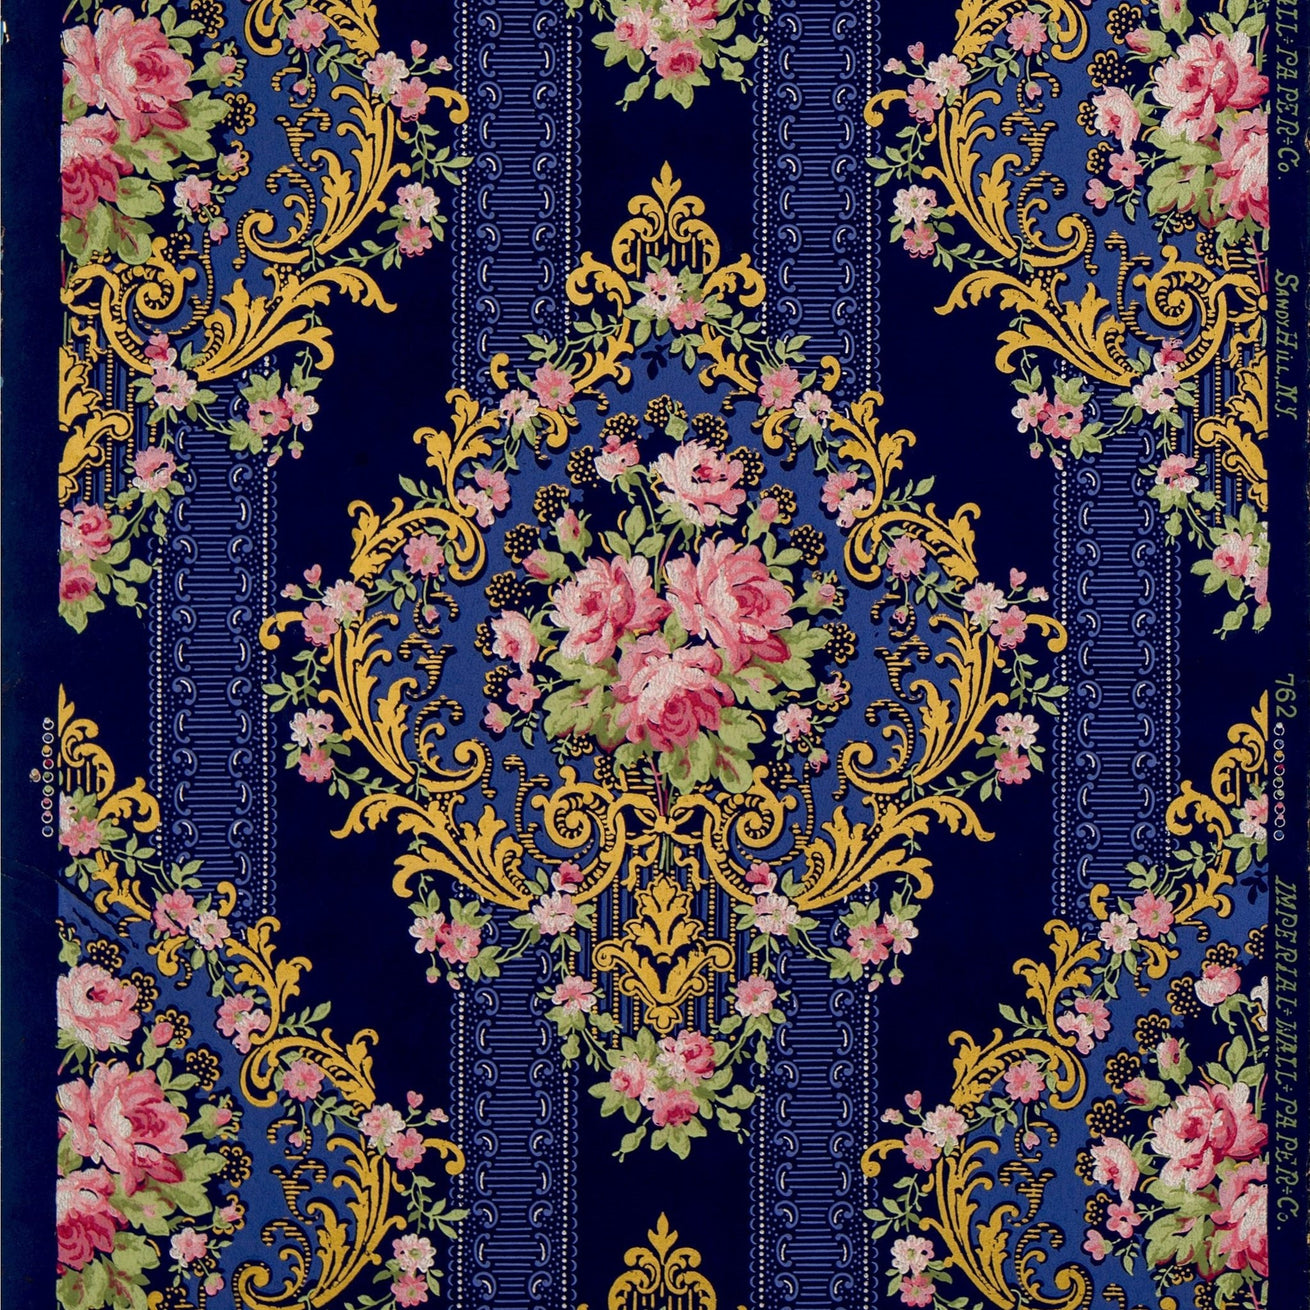 Roses in Bold Diamond Scroll Cartouches - Antique Wallpaper Remnant